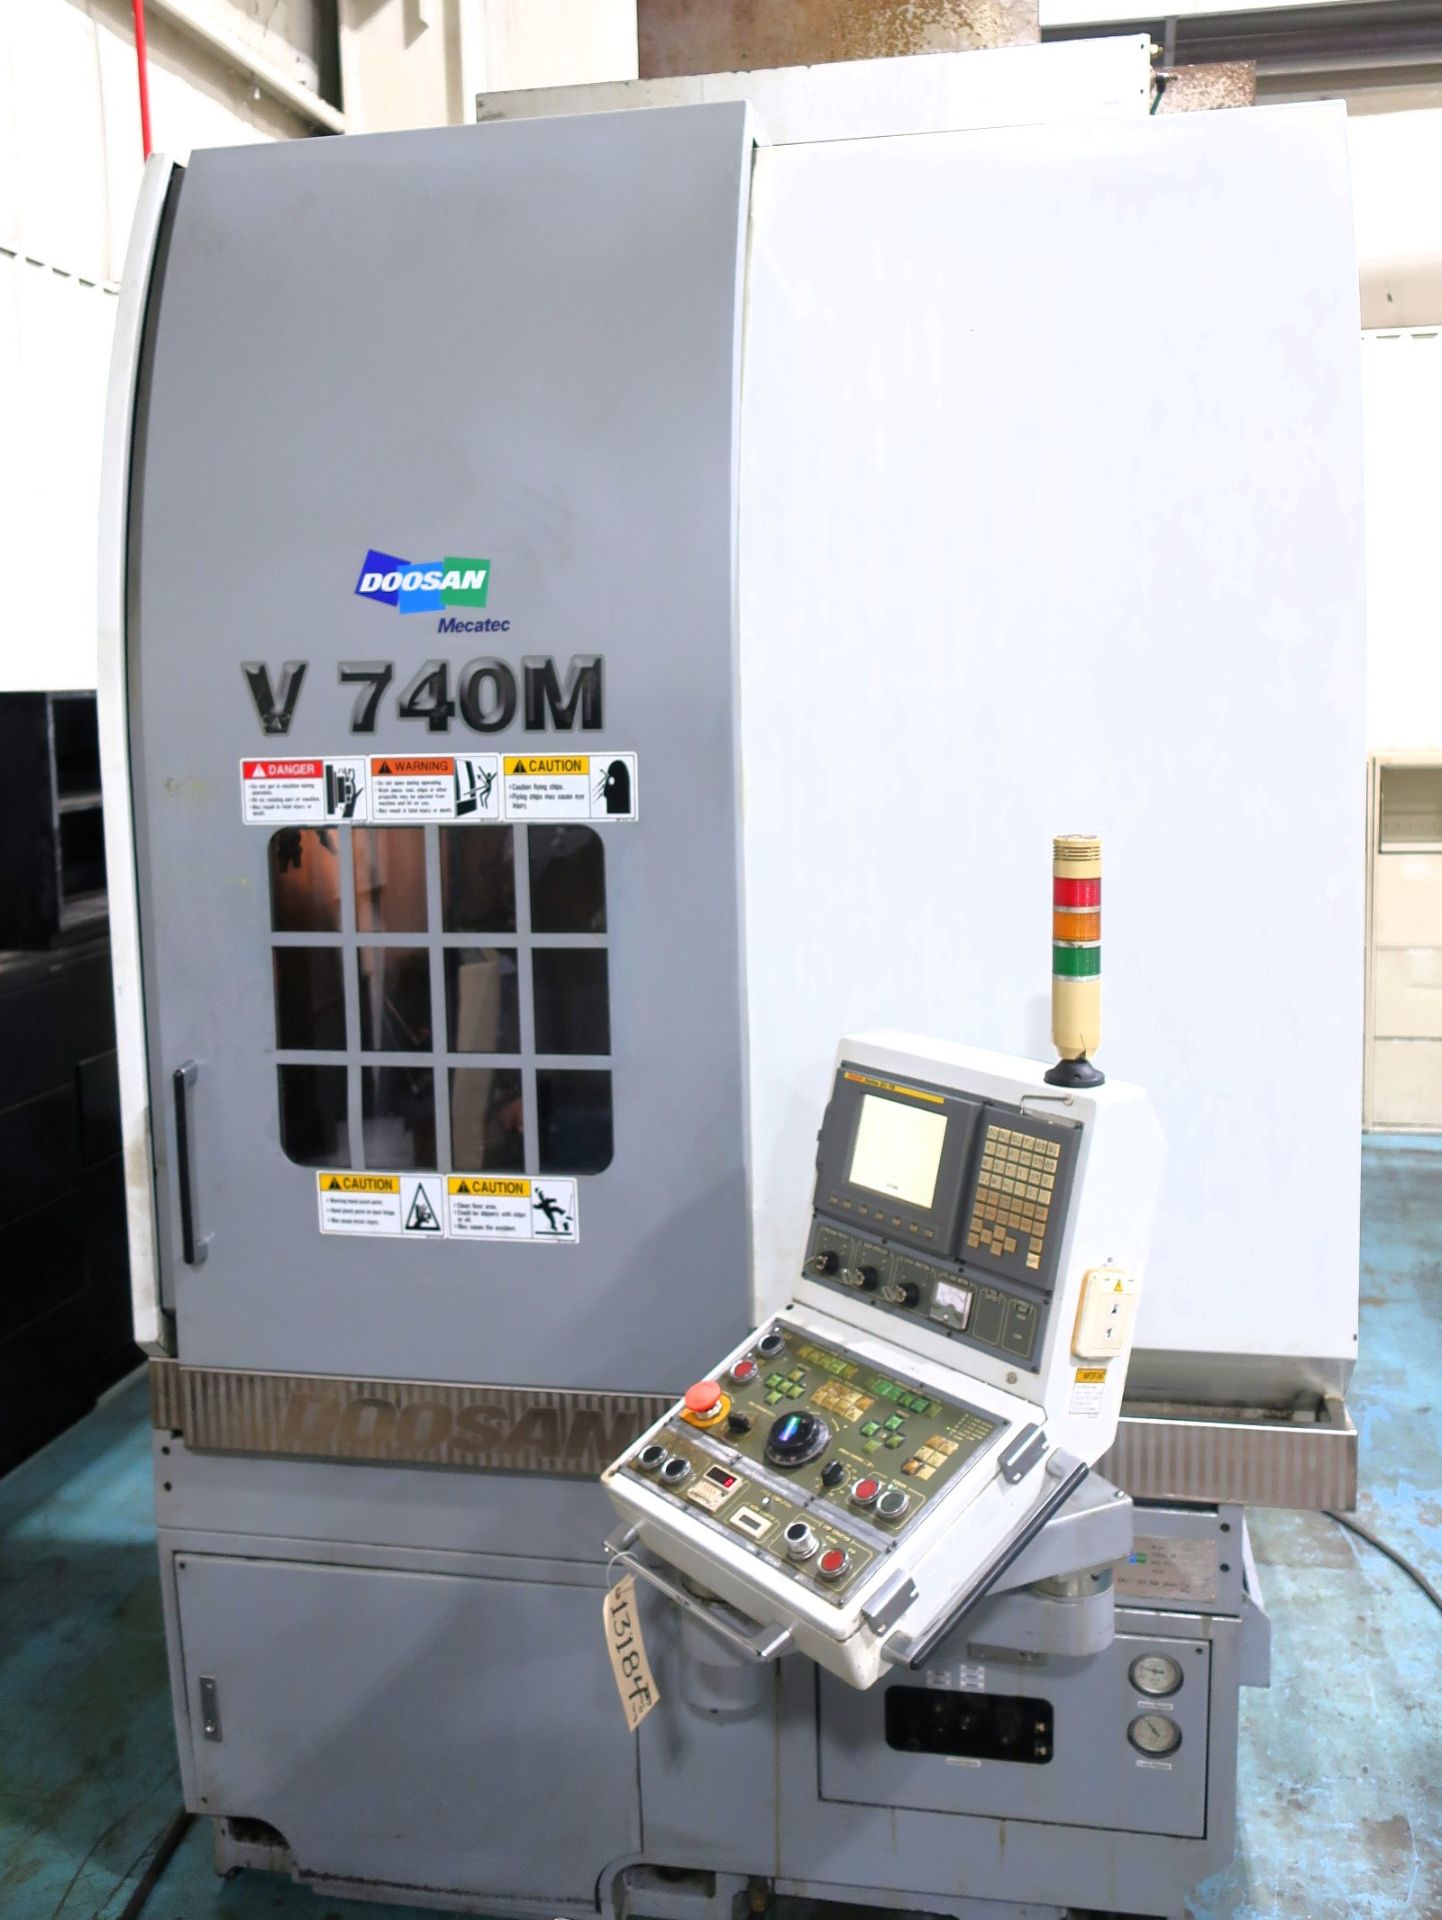 2006 24" Doosan V740M 3-Axis CNC Vertical Turning Center w/live tooling and C-axis, S/N 1013 - Image 12 of 13